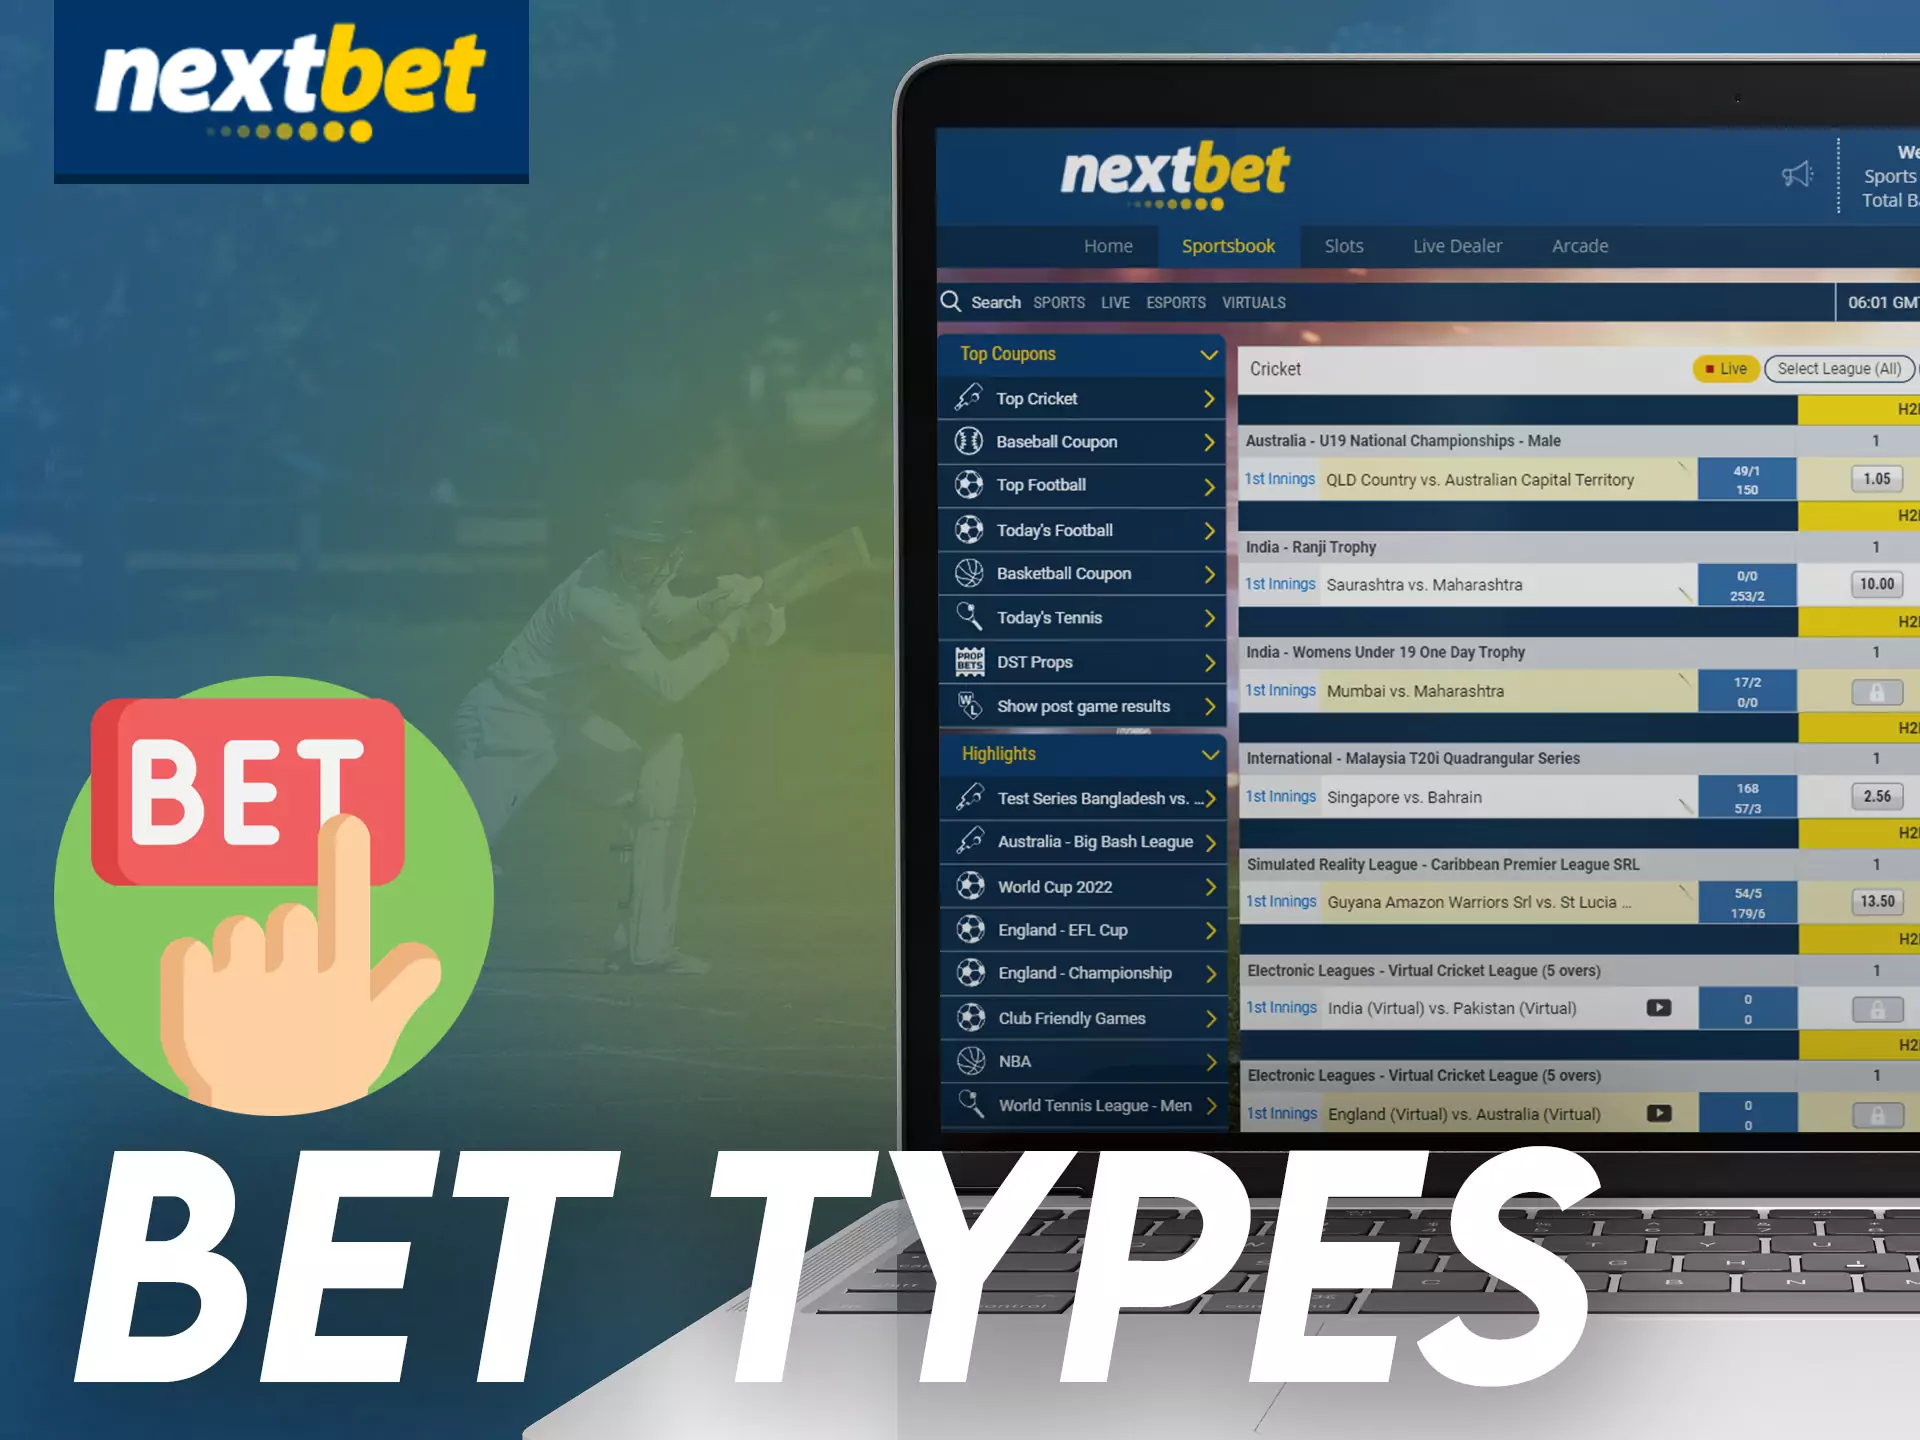 In Nextbet you can try different types of bet.